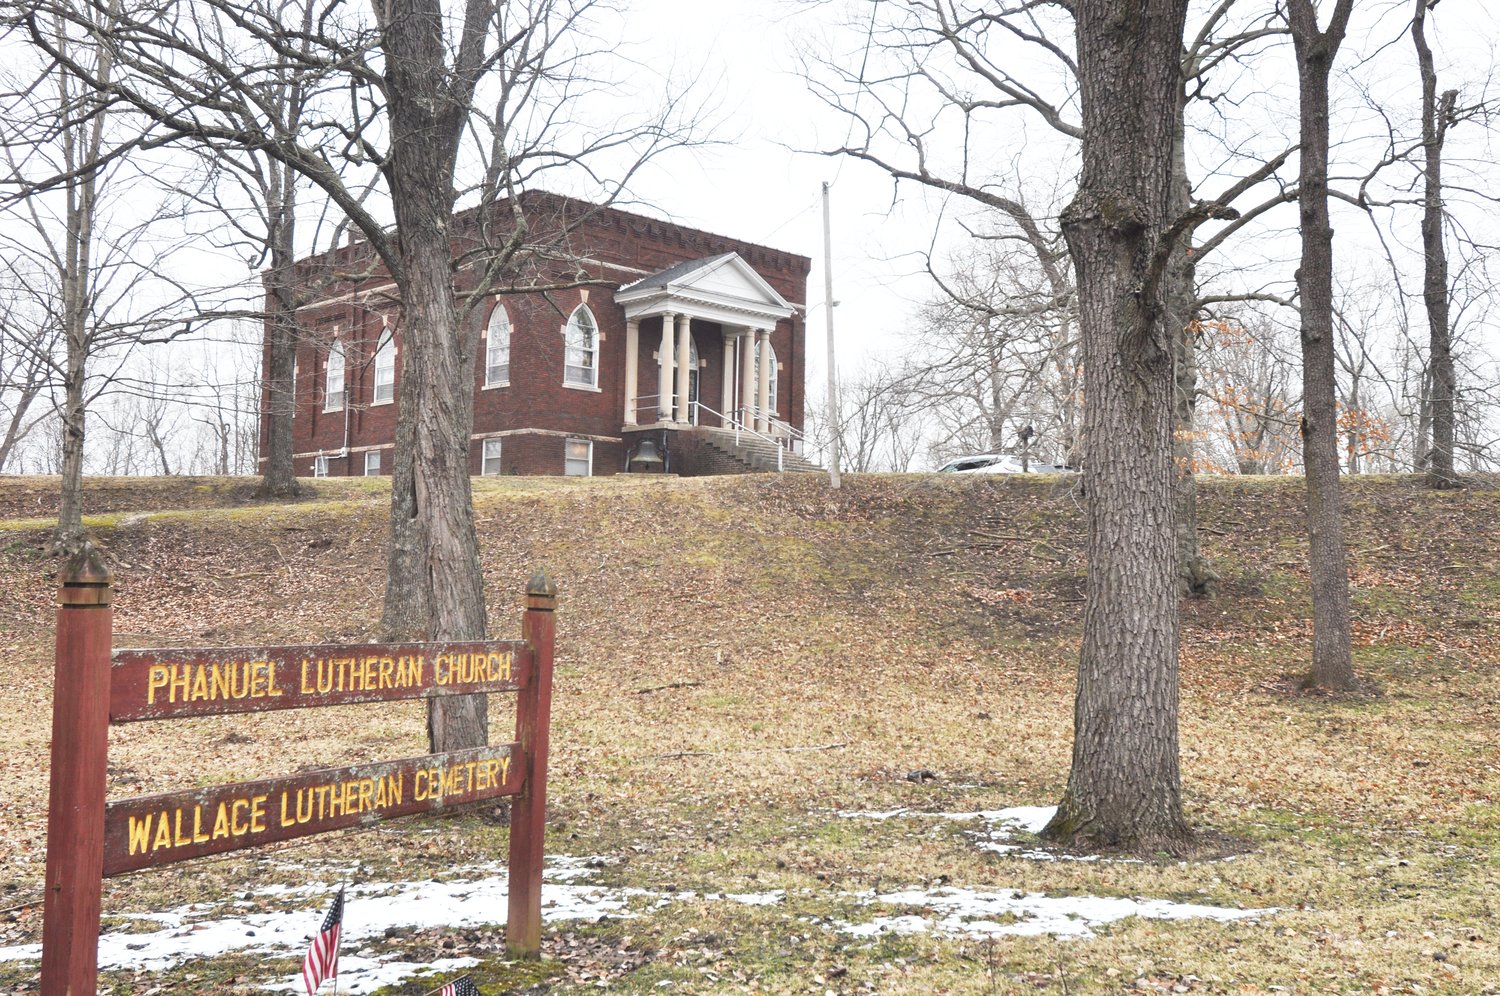 Phanuel Lutheran Church, which closed in 2018, is re-opening as the Historic Lutheran Church Event Center. Phanuel was the first church in Fountain County's Jackson Township.